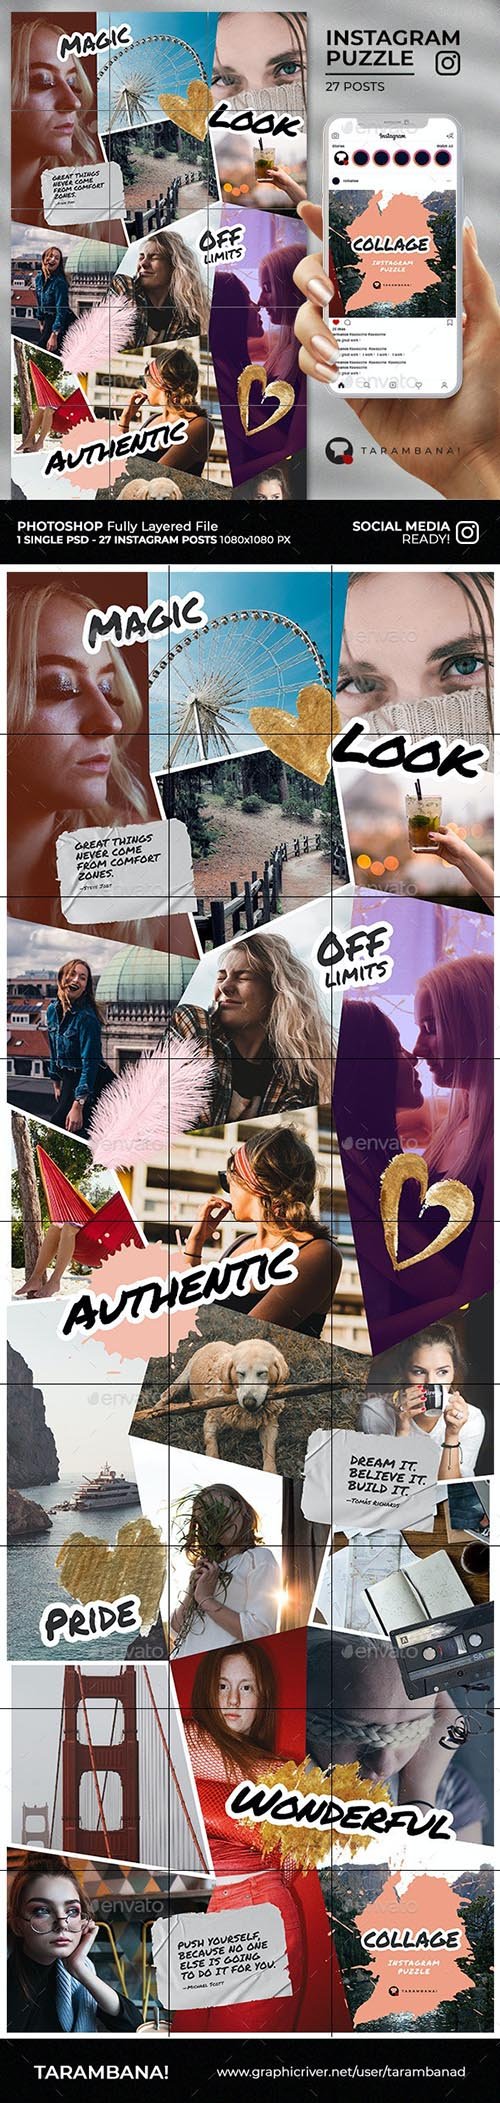 GraphicRiver - Collage - Instagram Puzzle Feed - 28278061